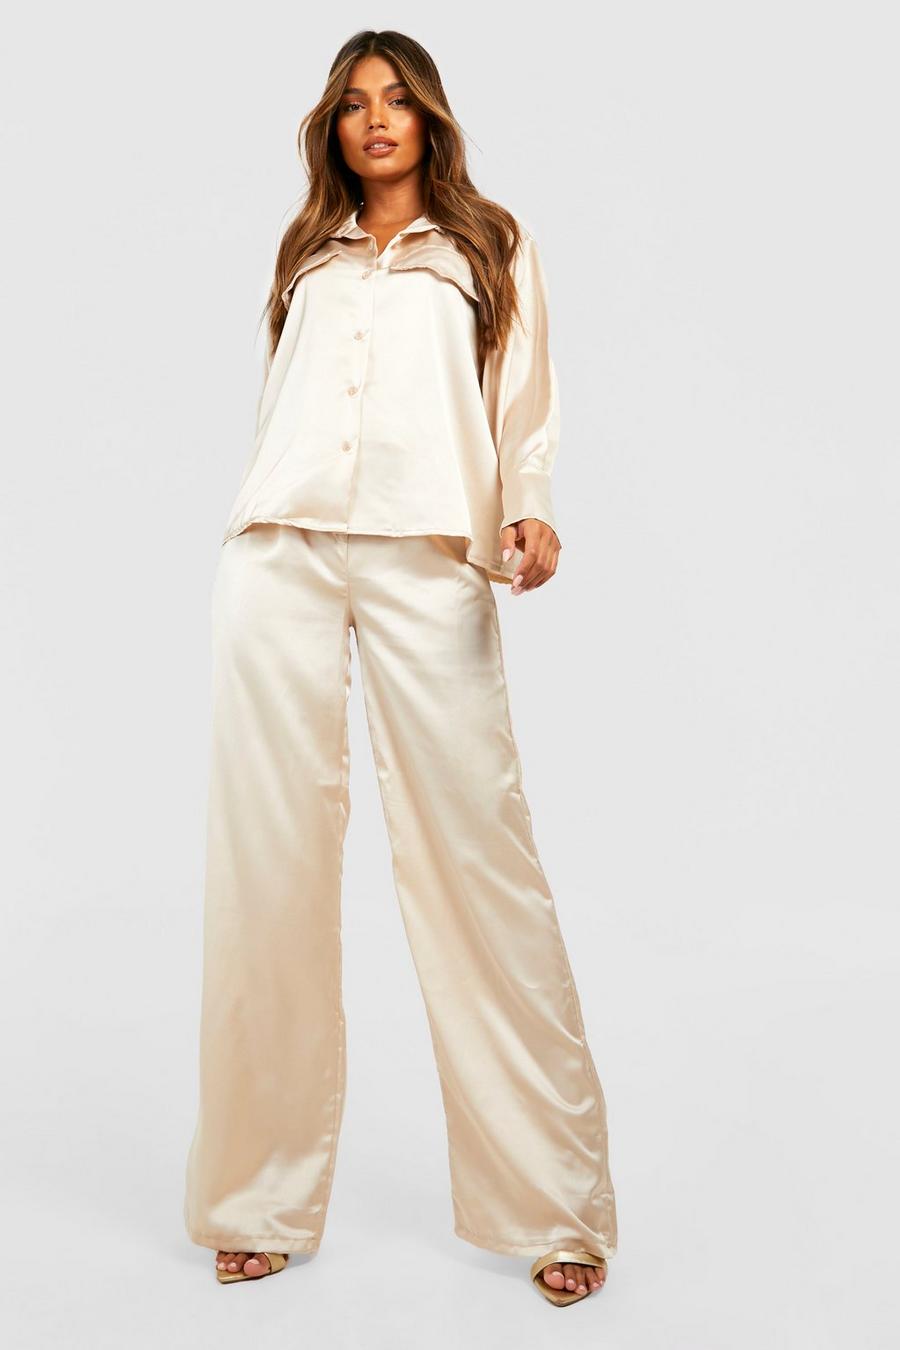 Champagne Satin Relaxed Fit Shirt & Wide Leg Pants image number 1